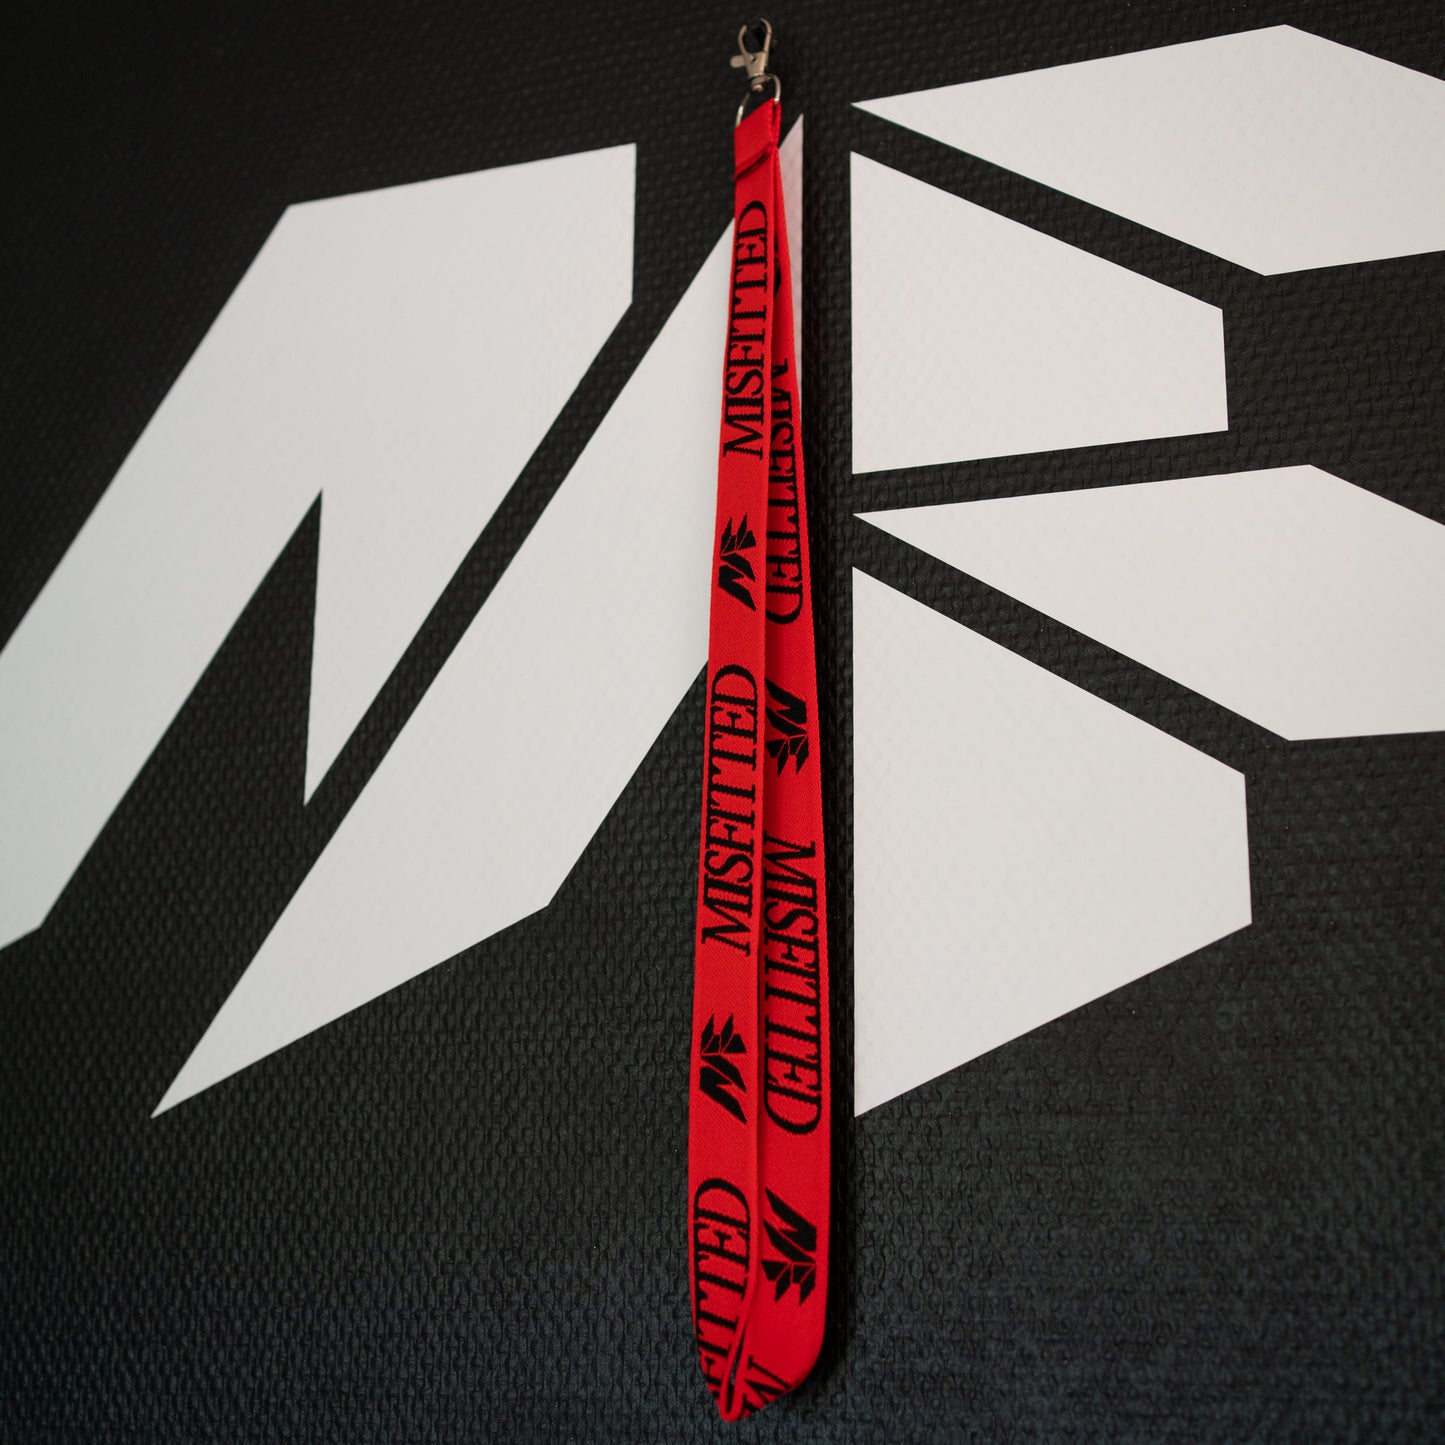 FIRE RED LANYARD